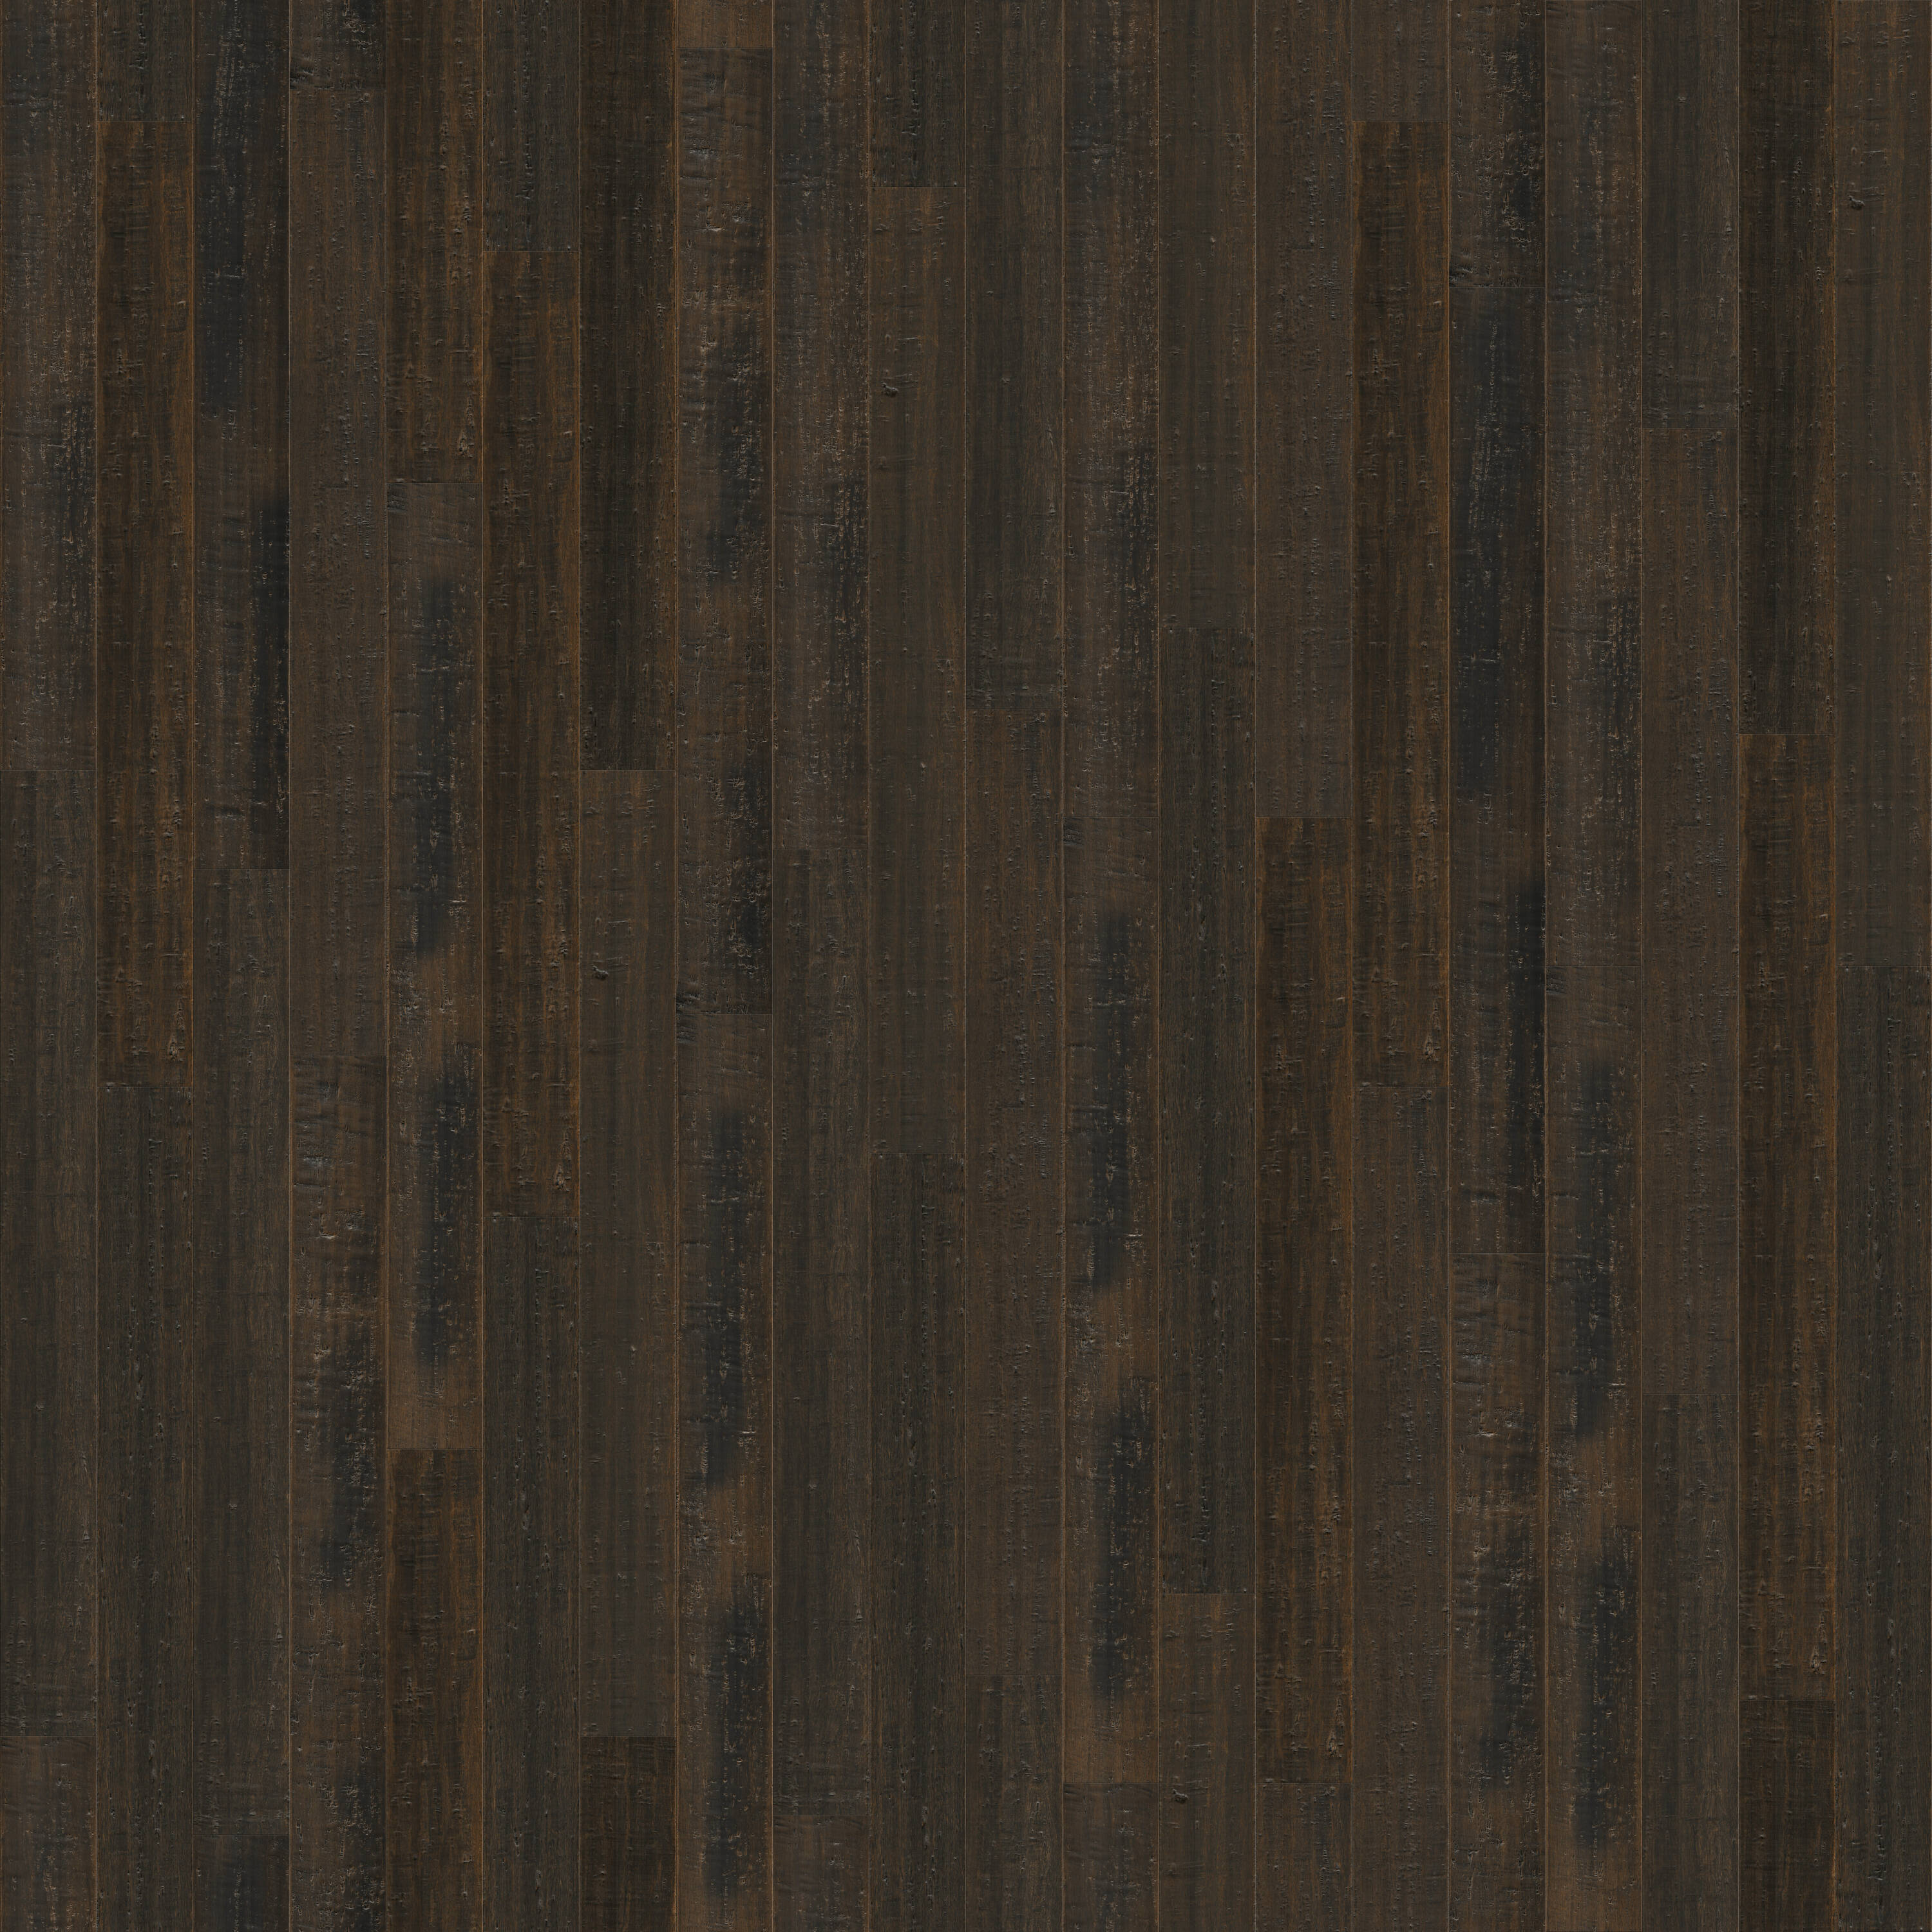 Fossilized Vintage Port Bamboo 5-5/16-in W x 9/16-in T x Handscraped Engineered Hardwood Flooring (21.5-sq ft) in Brown | - CALI 7014009100